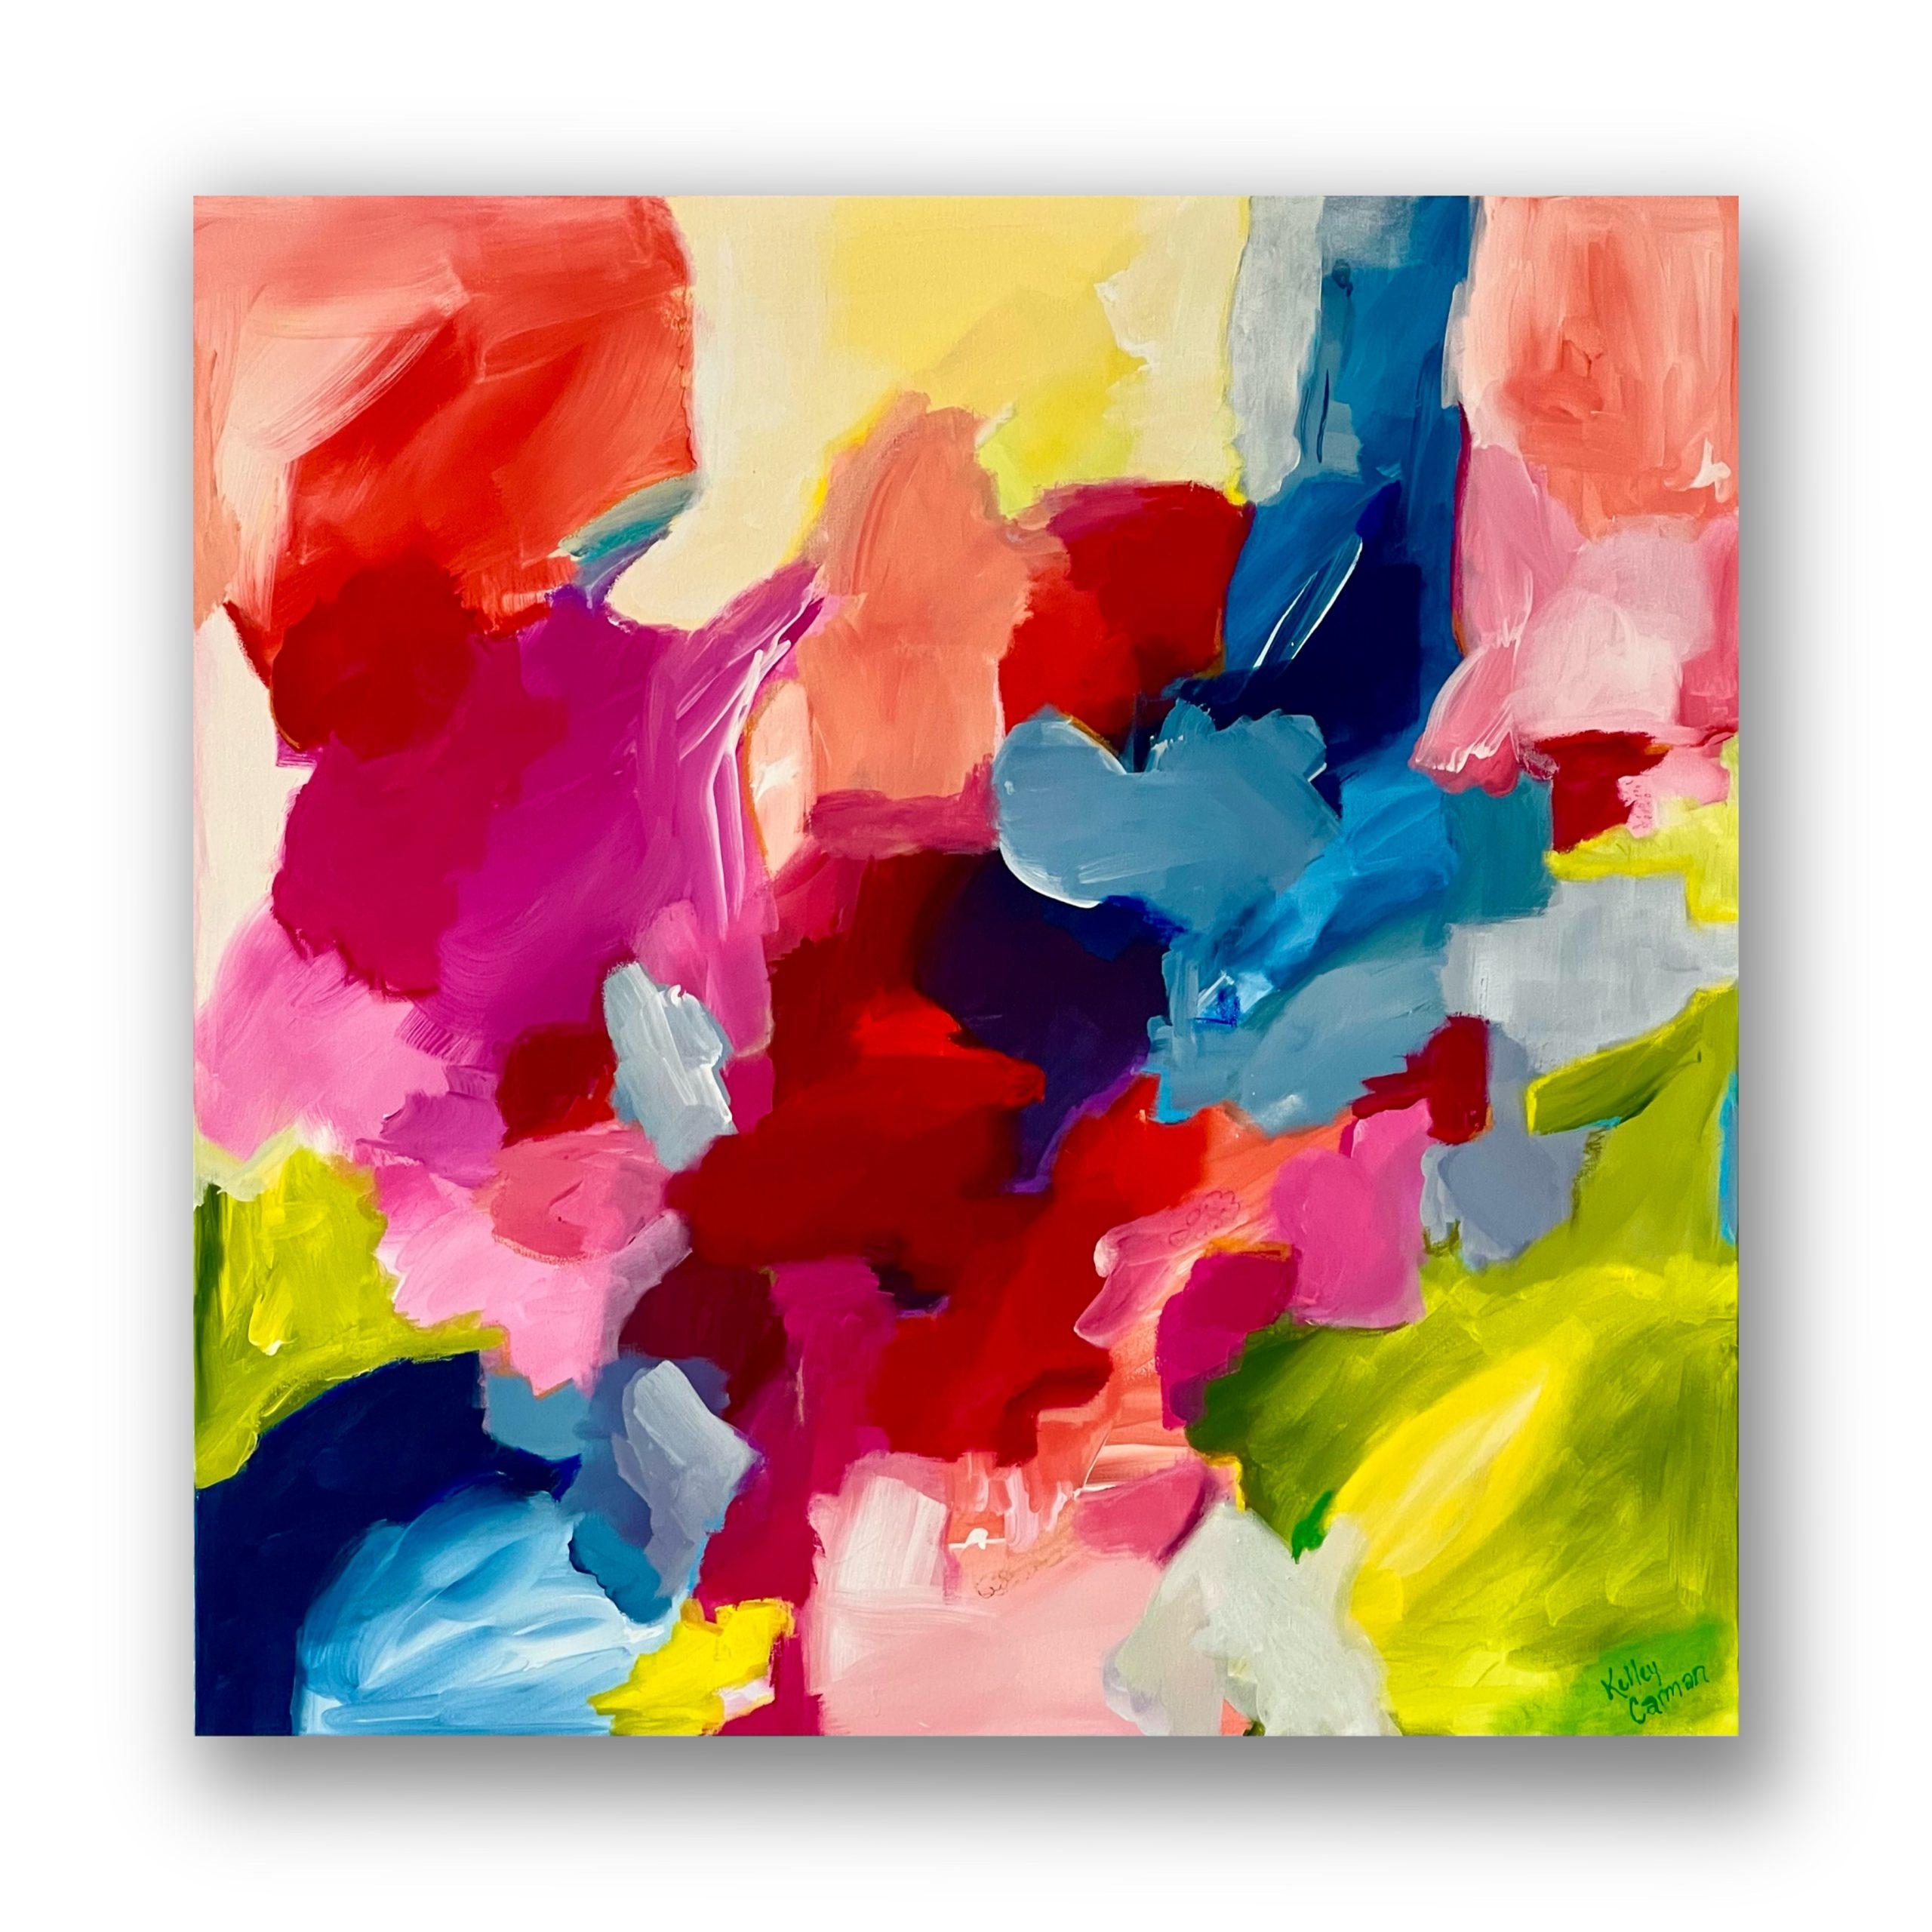 First Day of School (Gestural Abstract, Colorful, Pink, Yellow, Blue, Green) - Painting by Kelley Carman